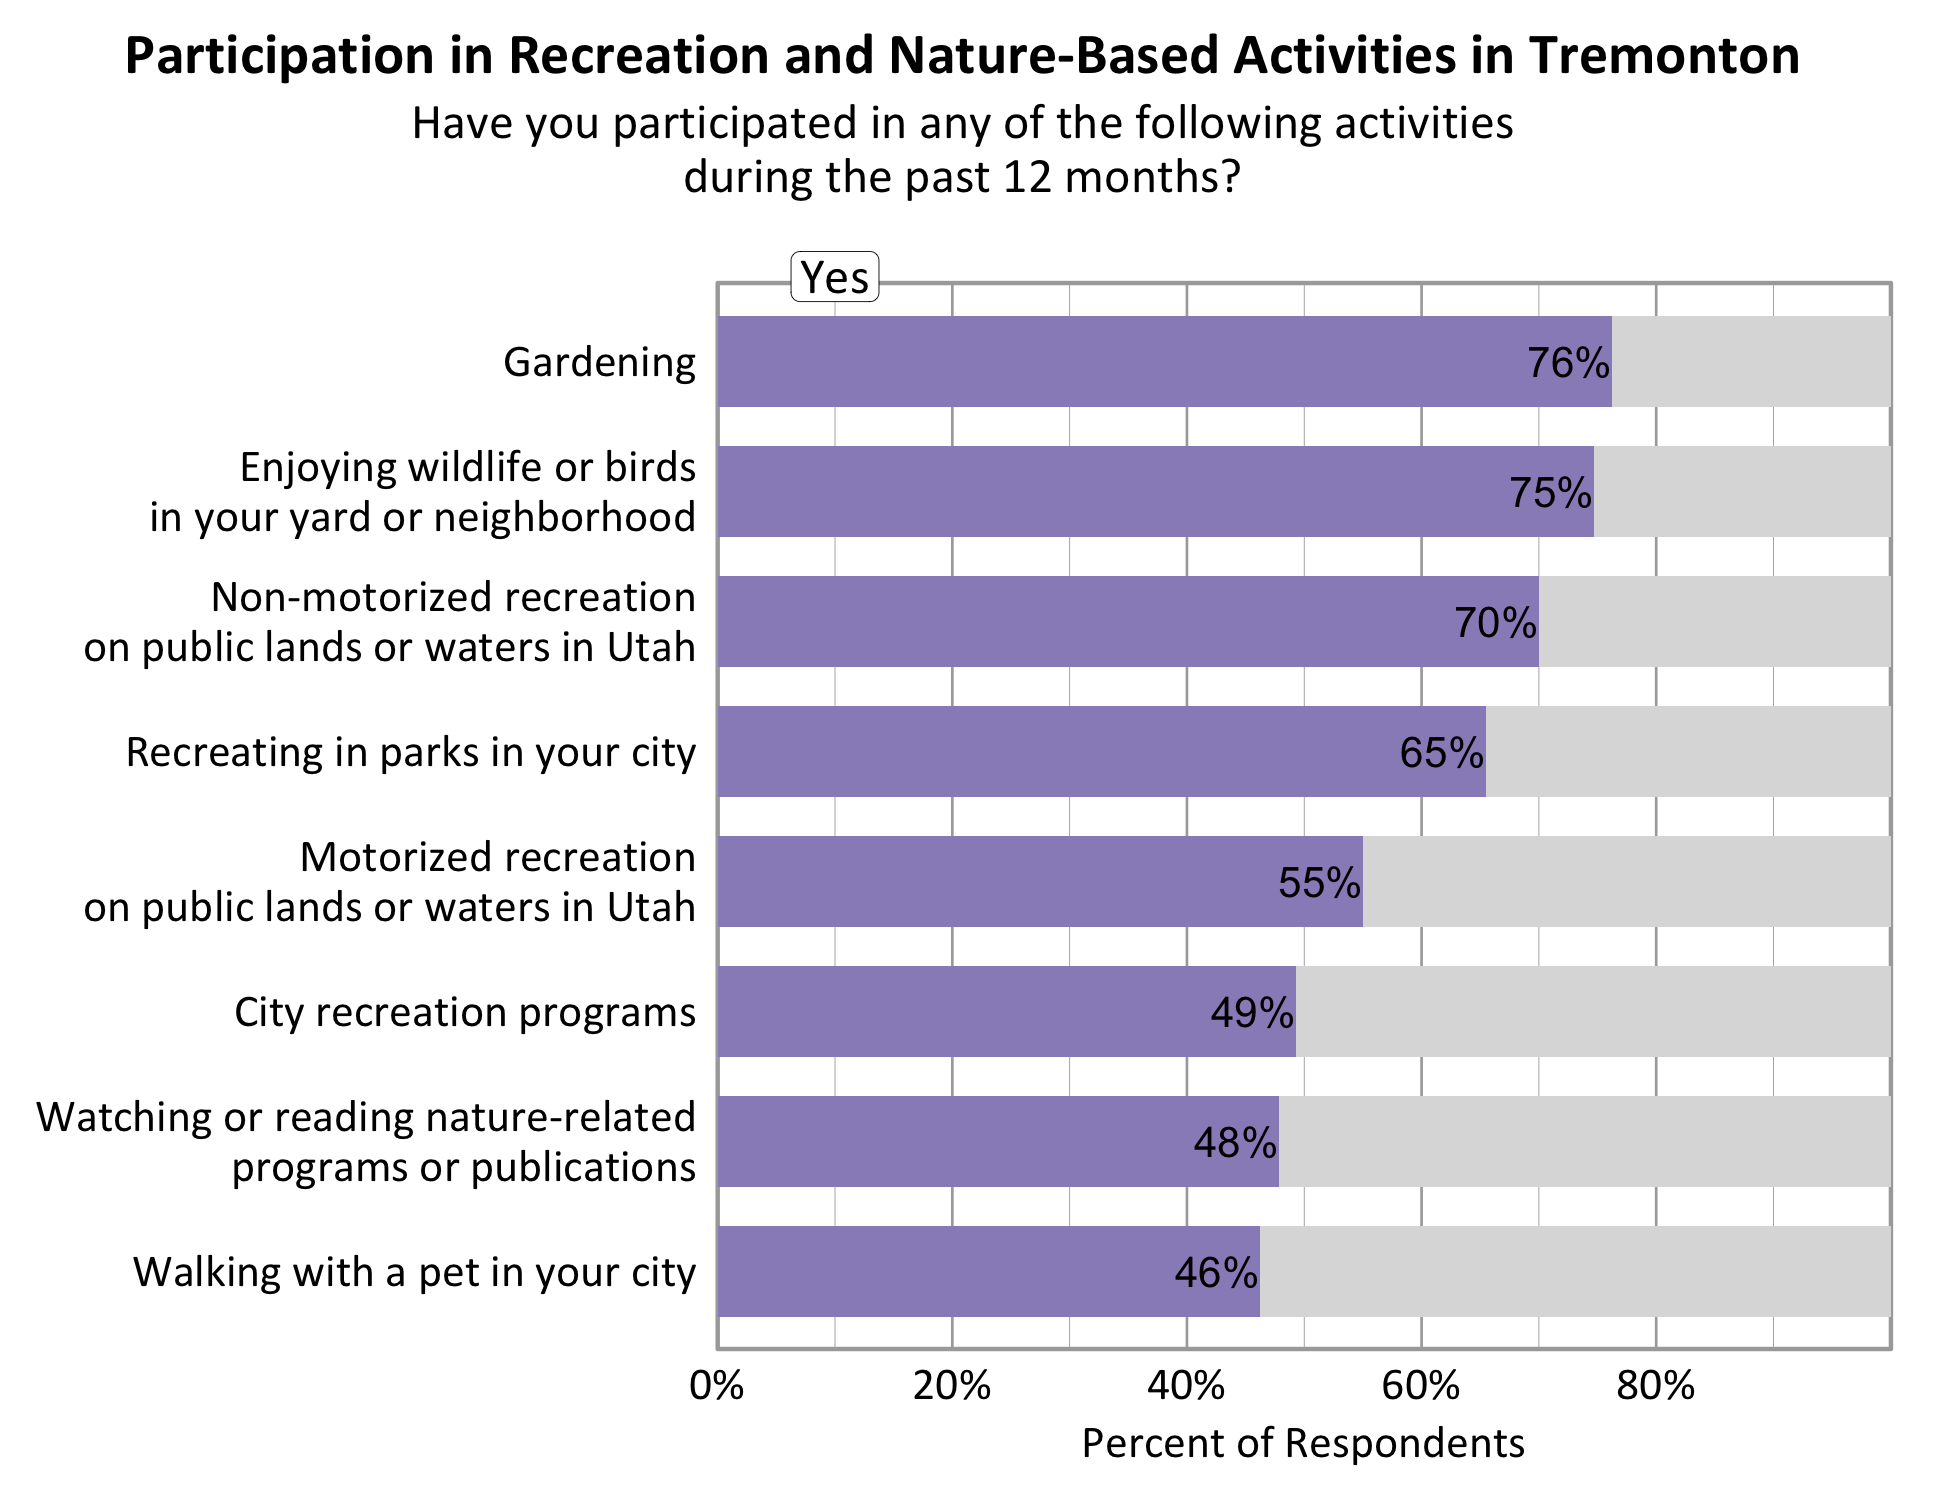 Type: Bar Graph Title: Participation in Recreation and Nature-based Activities in Tremonton. Subtitle: Have you participated in any of the following activities during the past 12 months? Data - 70% of respondents indicated yes to non-motorized recreation on public lands or waters in Utah. 75% of respondents indicated yes to enjoying wildlife or birds in your yard or neighborhood. 55% of respondents indicated yes to motorized recreation on public lands or waters in Utah. 65% of respondents indicated yes to recreating in parks in your city. 76% of respondents indicated yes to gardening. 49% of respondents indicated yes to city recreation programs. 48% of respondents indicated yes to watching or reading nature-related programs or publications. 46% of respondents indicated yes to walking with a pet in your city.